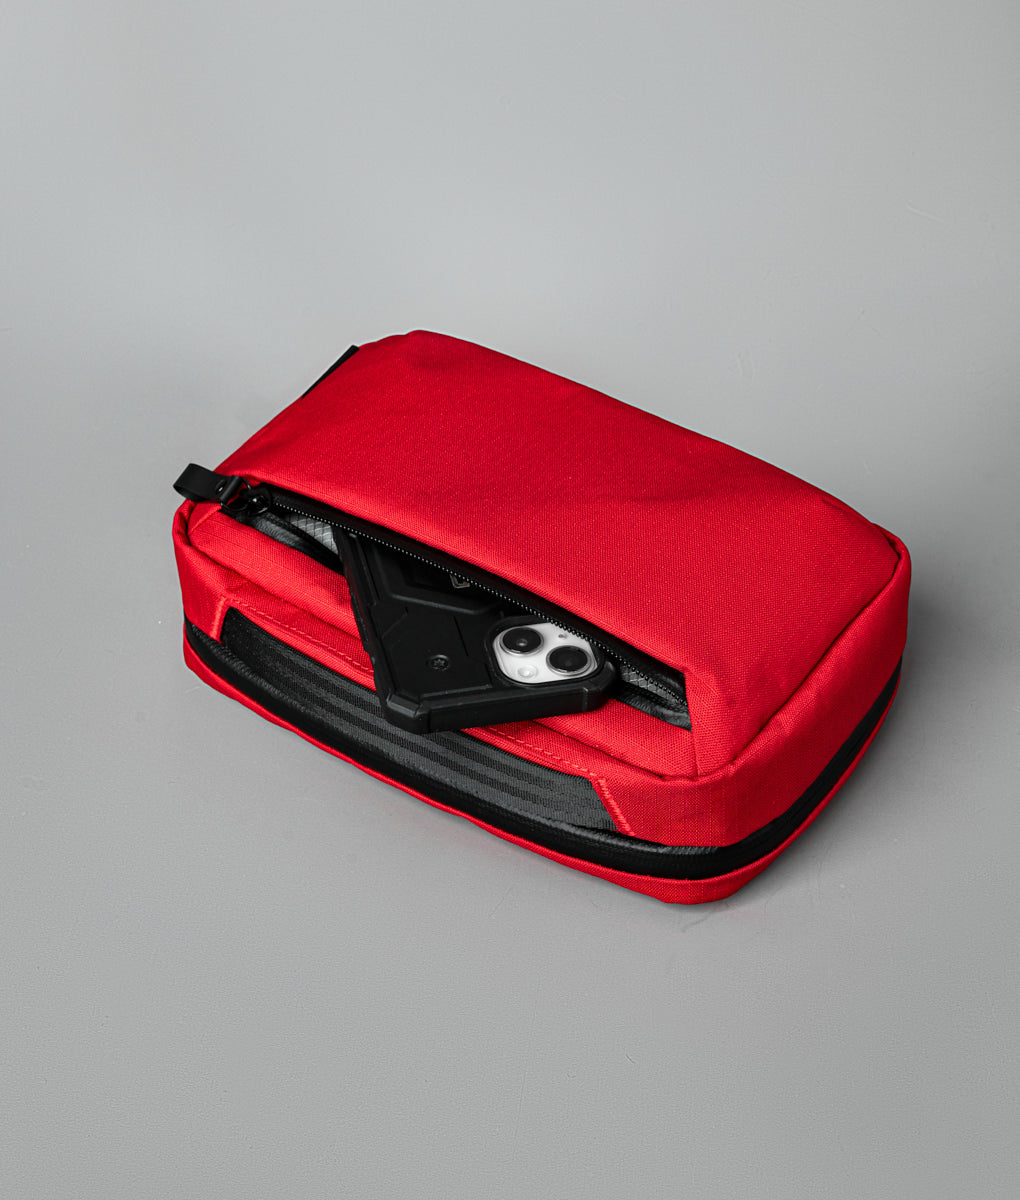 Elements Tech Case Max - EPLX450 Revel Red